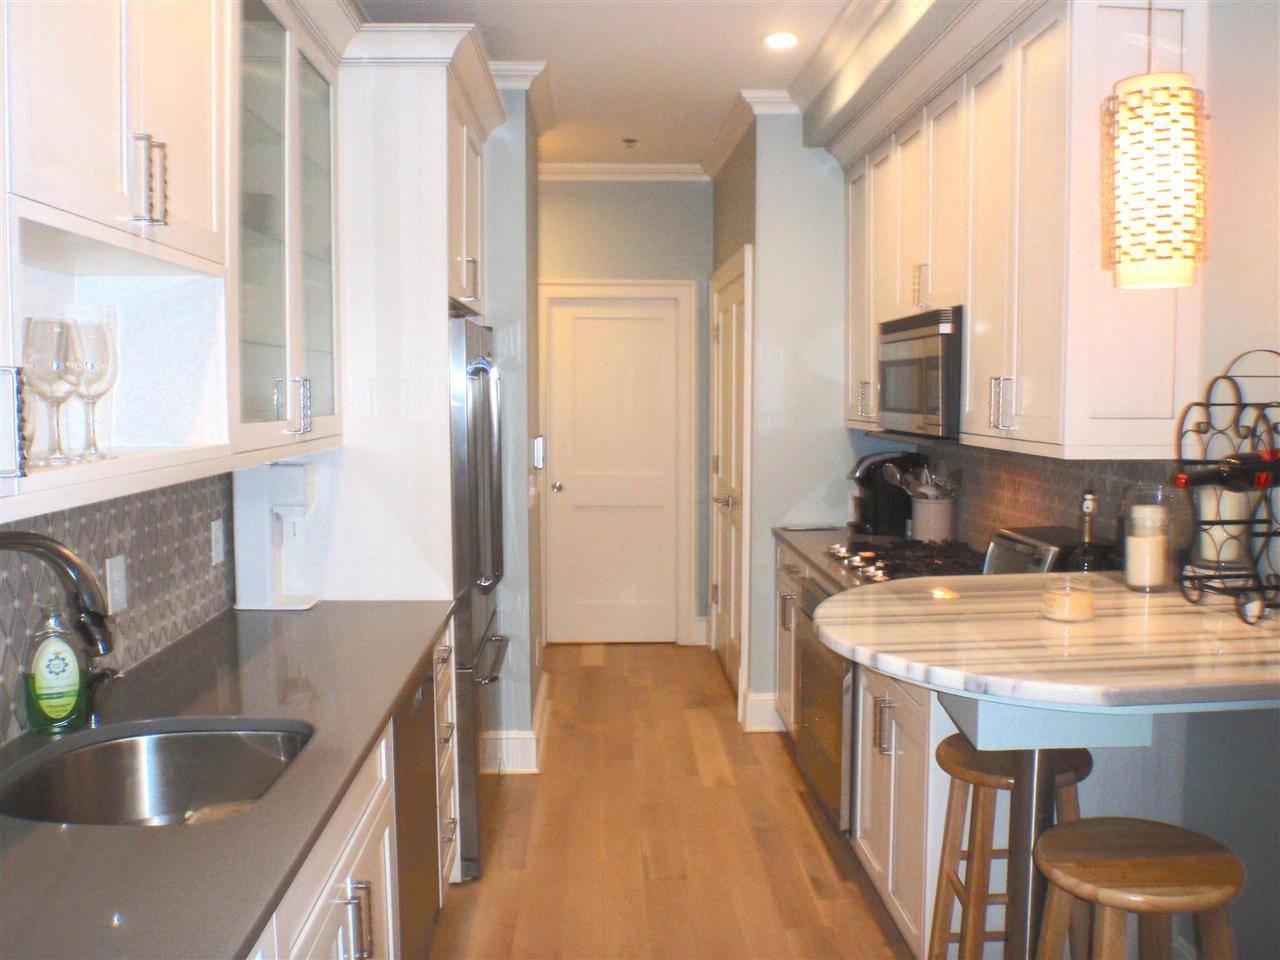 Move into this tastefully designed Jefferson Street two bedroom condo rental